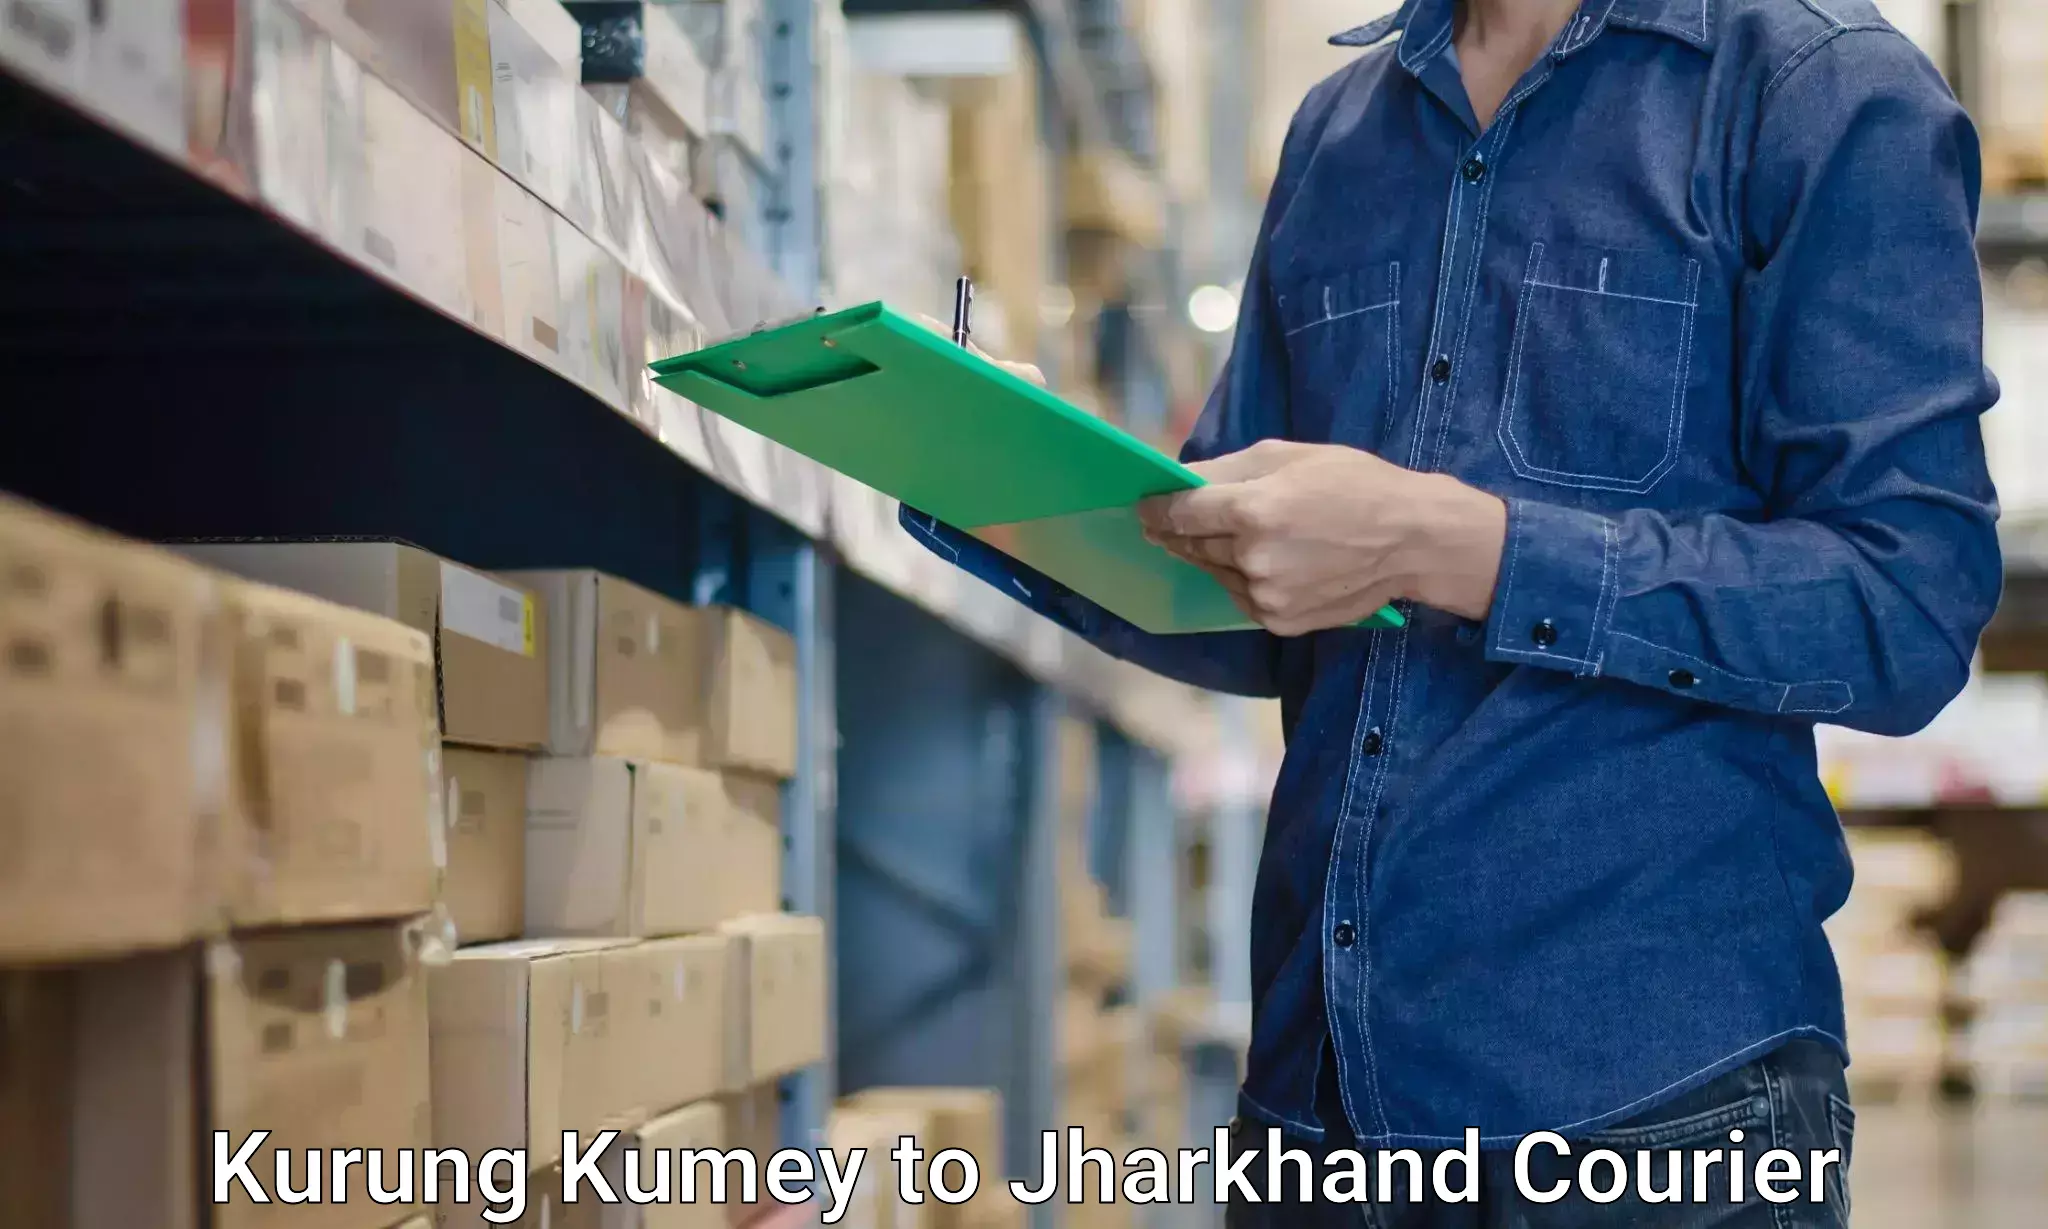 Professional moving company in Kurung Kumey to Dhanbad